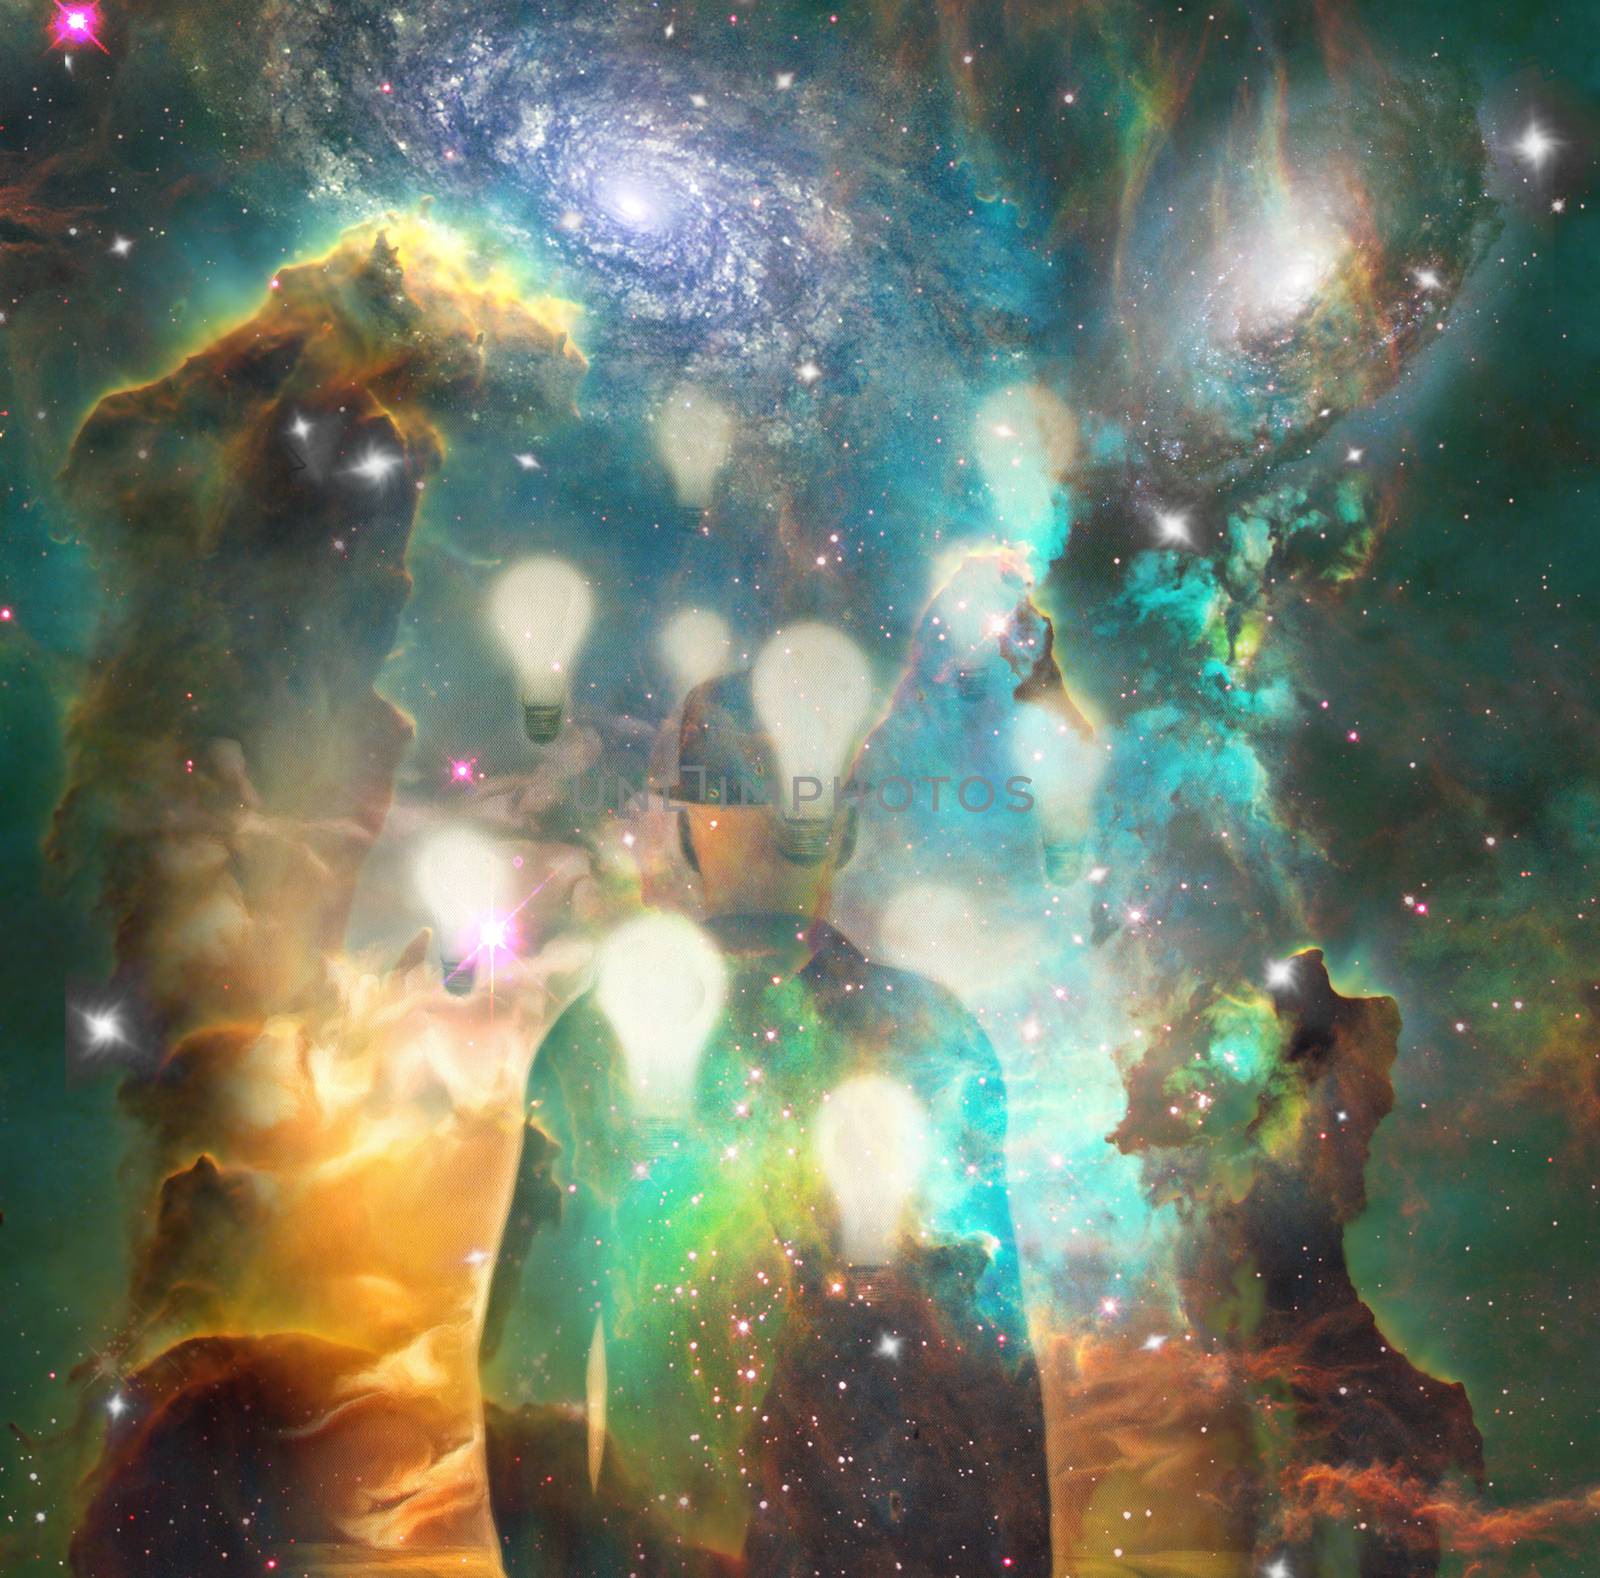 Surrealism. Man in suit with light bulbs around him stands in vivid universe. Some elements image credit NASA.